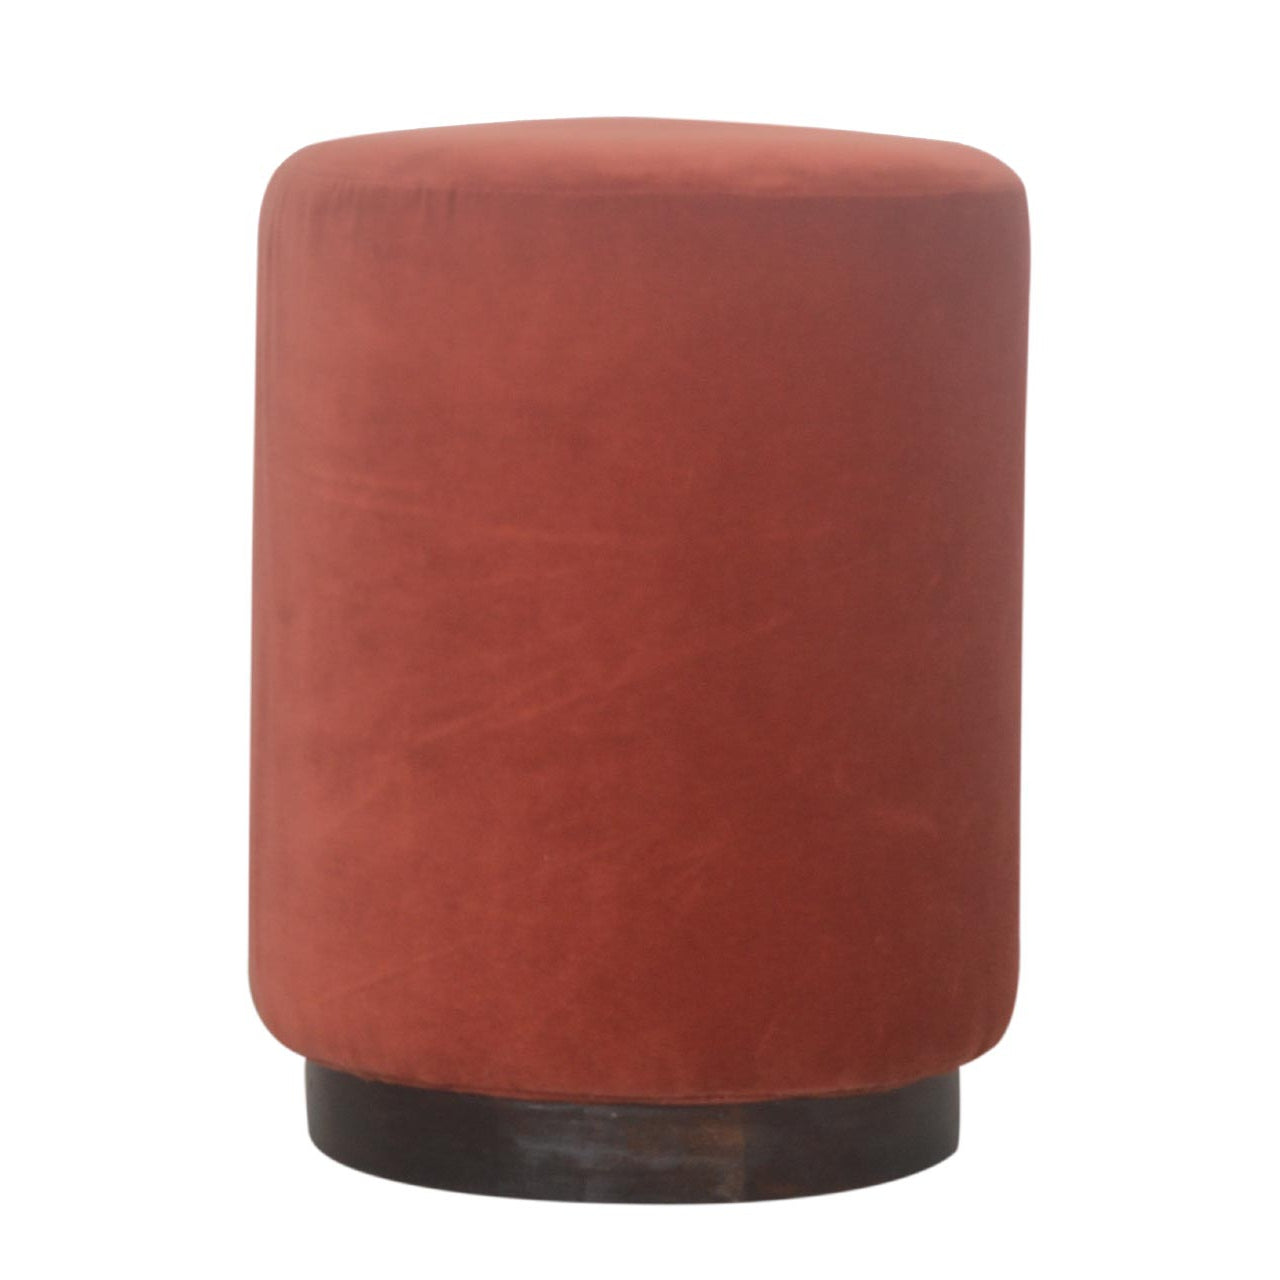 View Brick Red Velvet Footstool with Wooden Base information